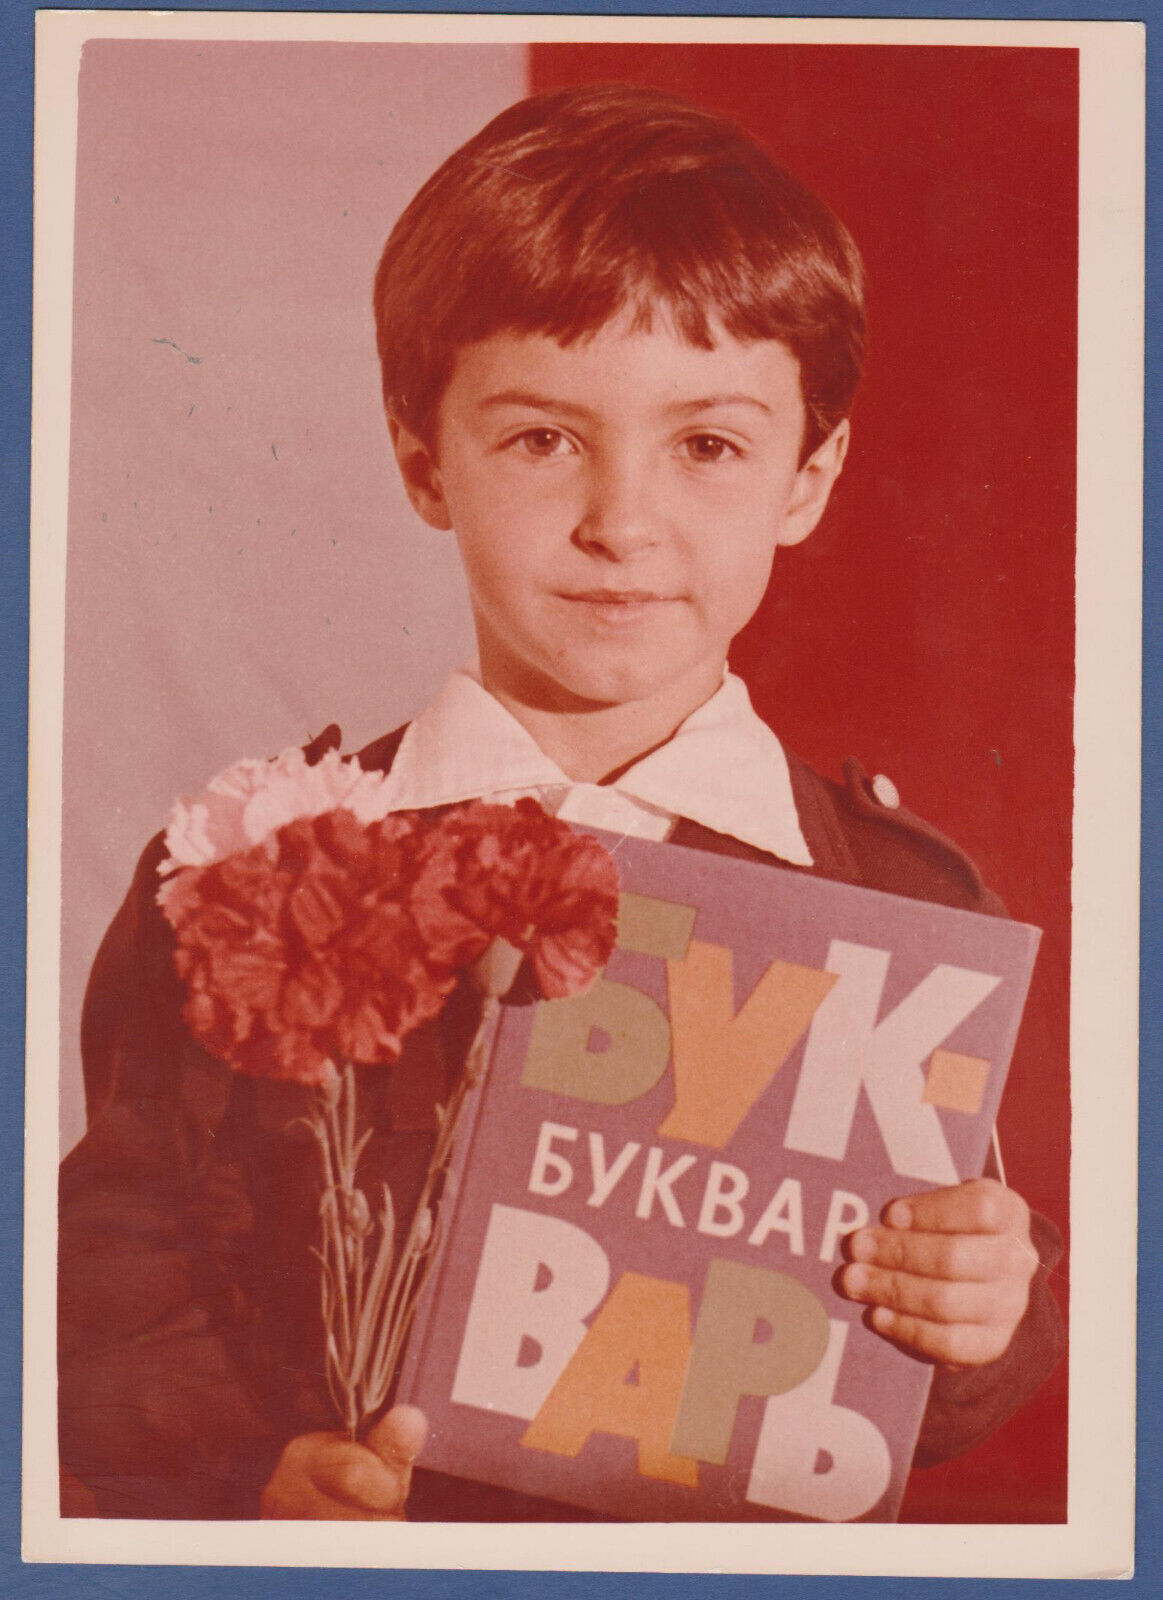 Beautiful Boy with primer book and flowers, schoolboy Soviet Vintage Photo USSR